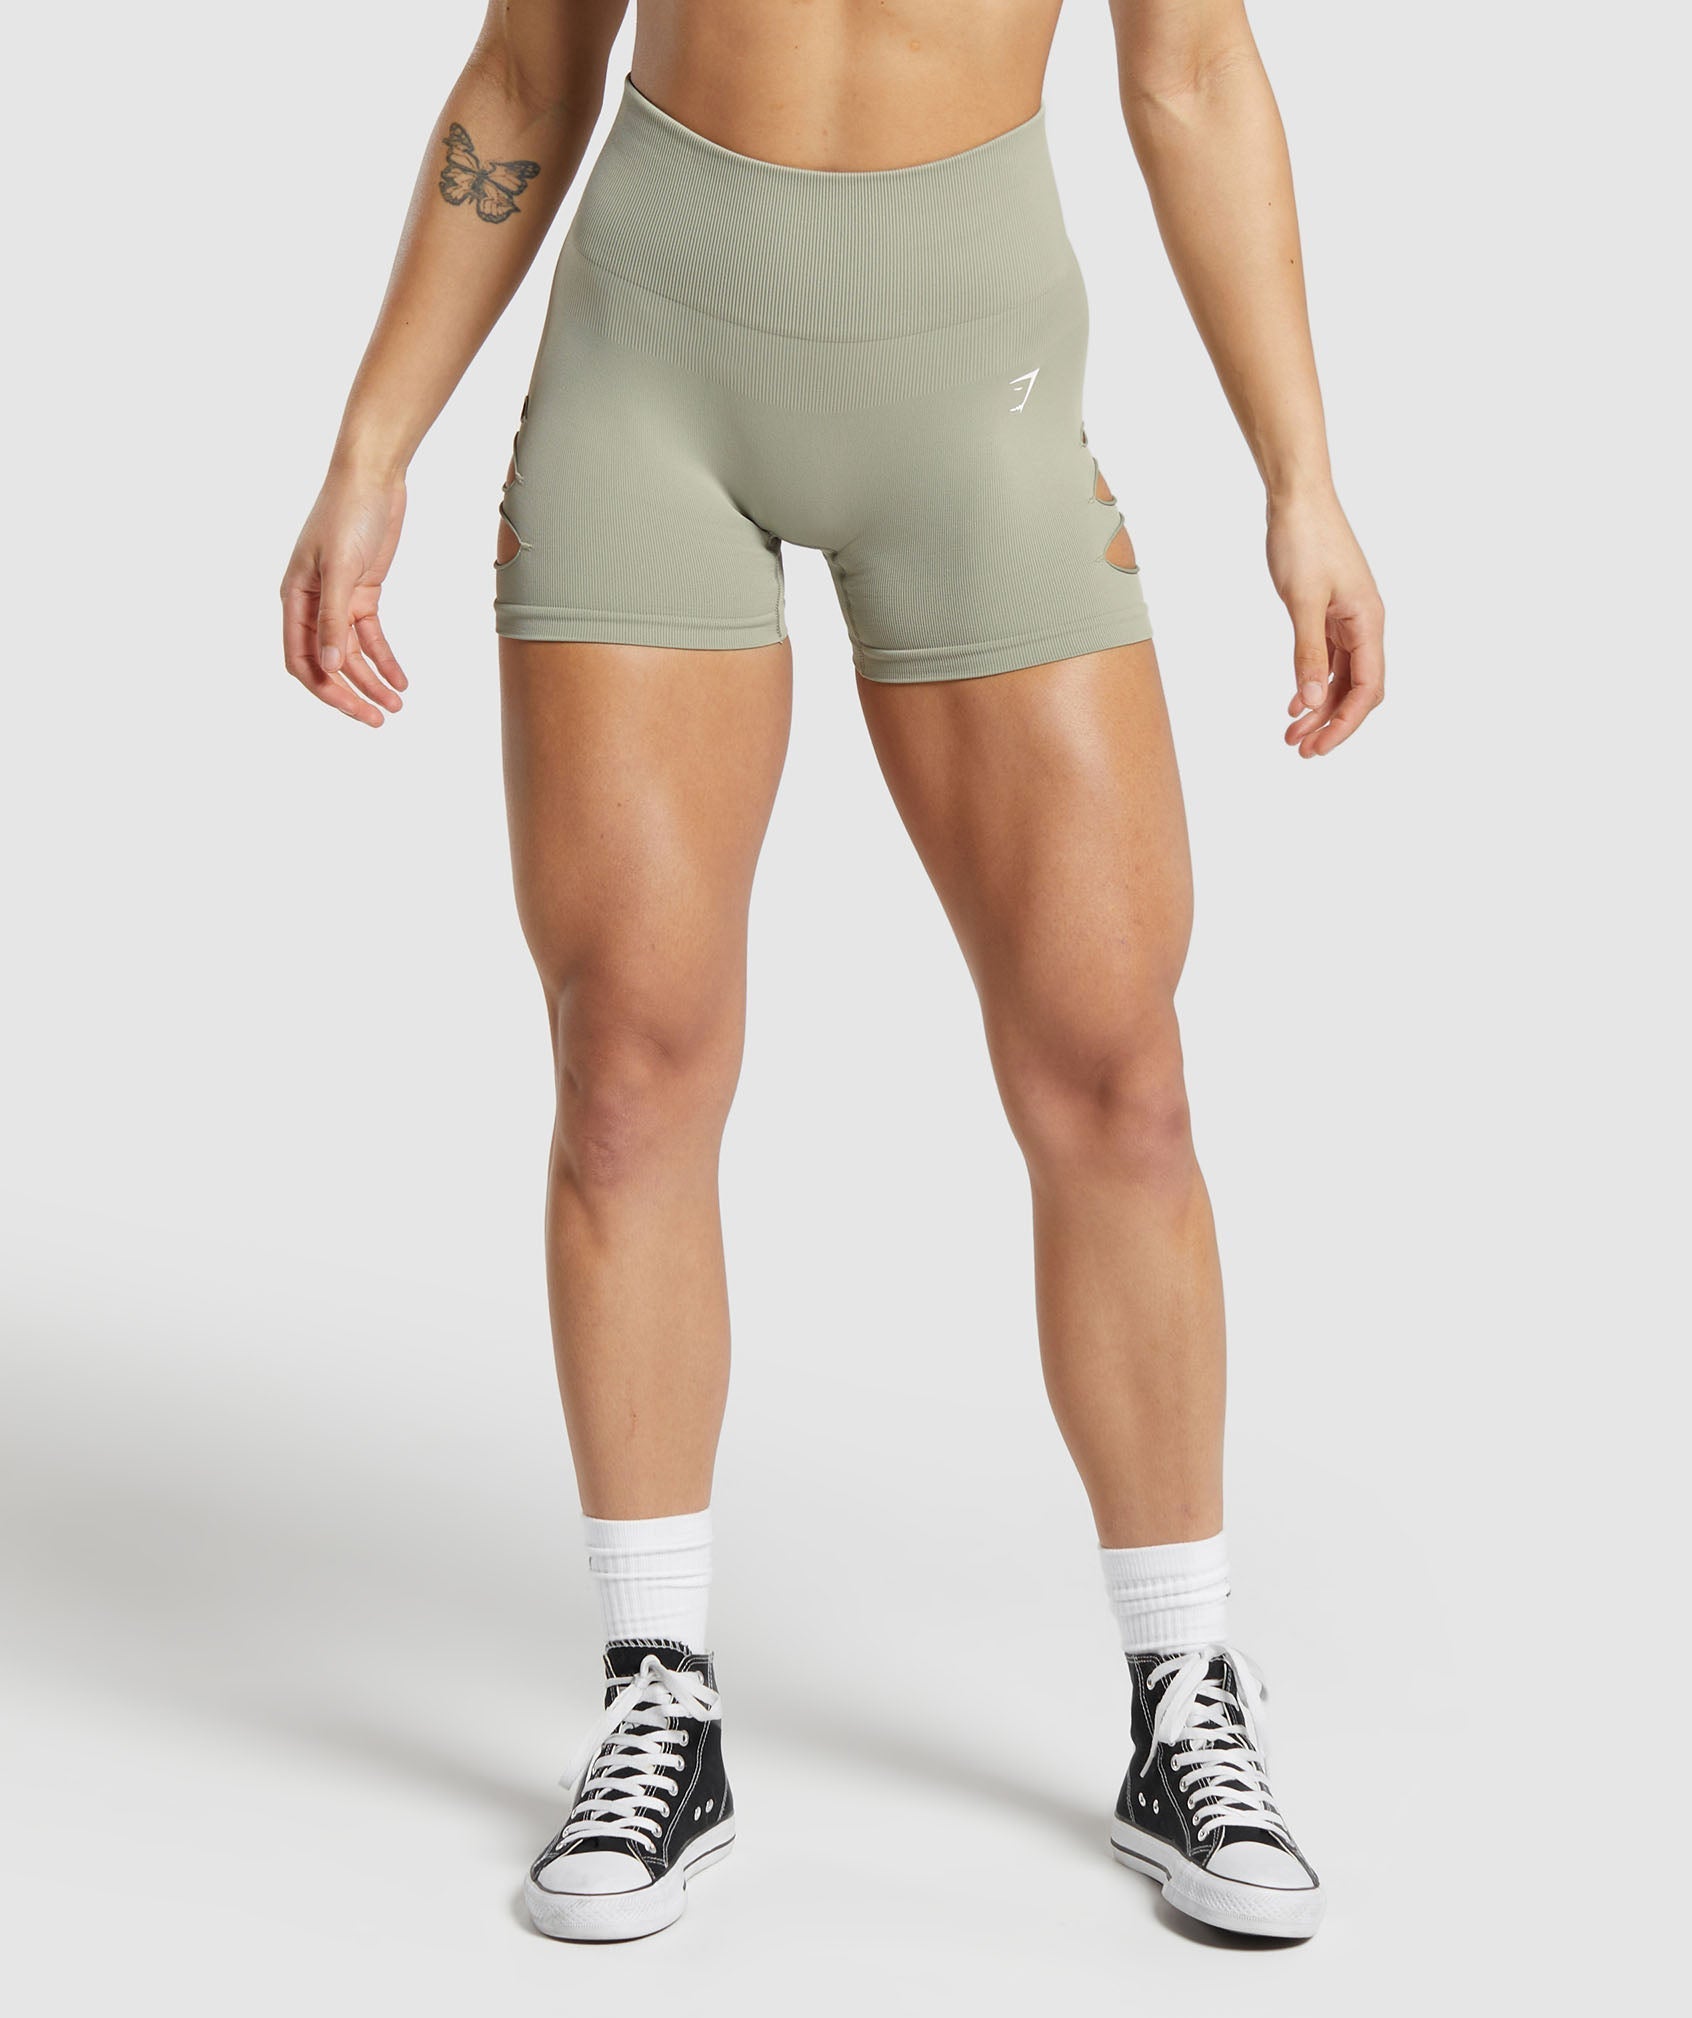 Gains Seamless Ripped Shorts in Chalk Green - view 2